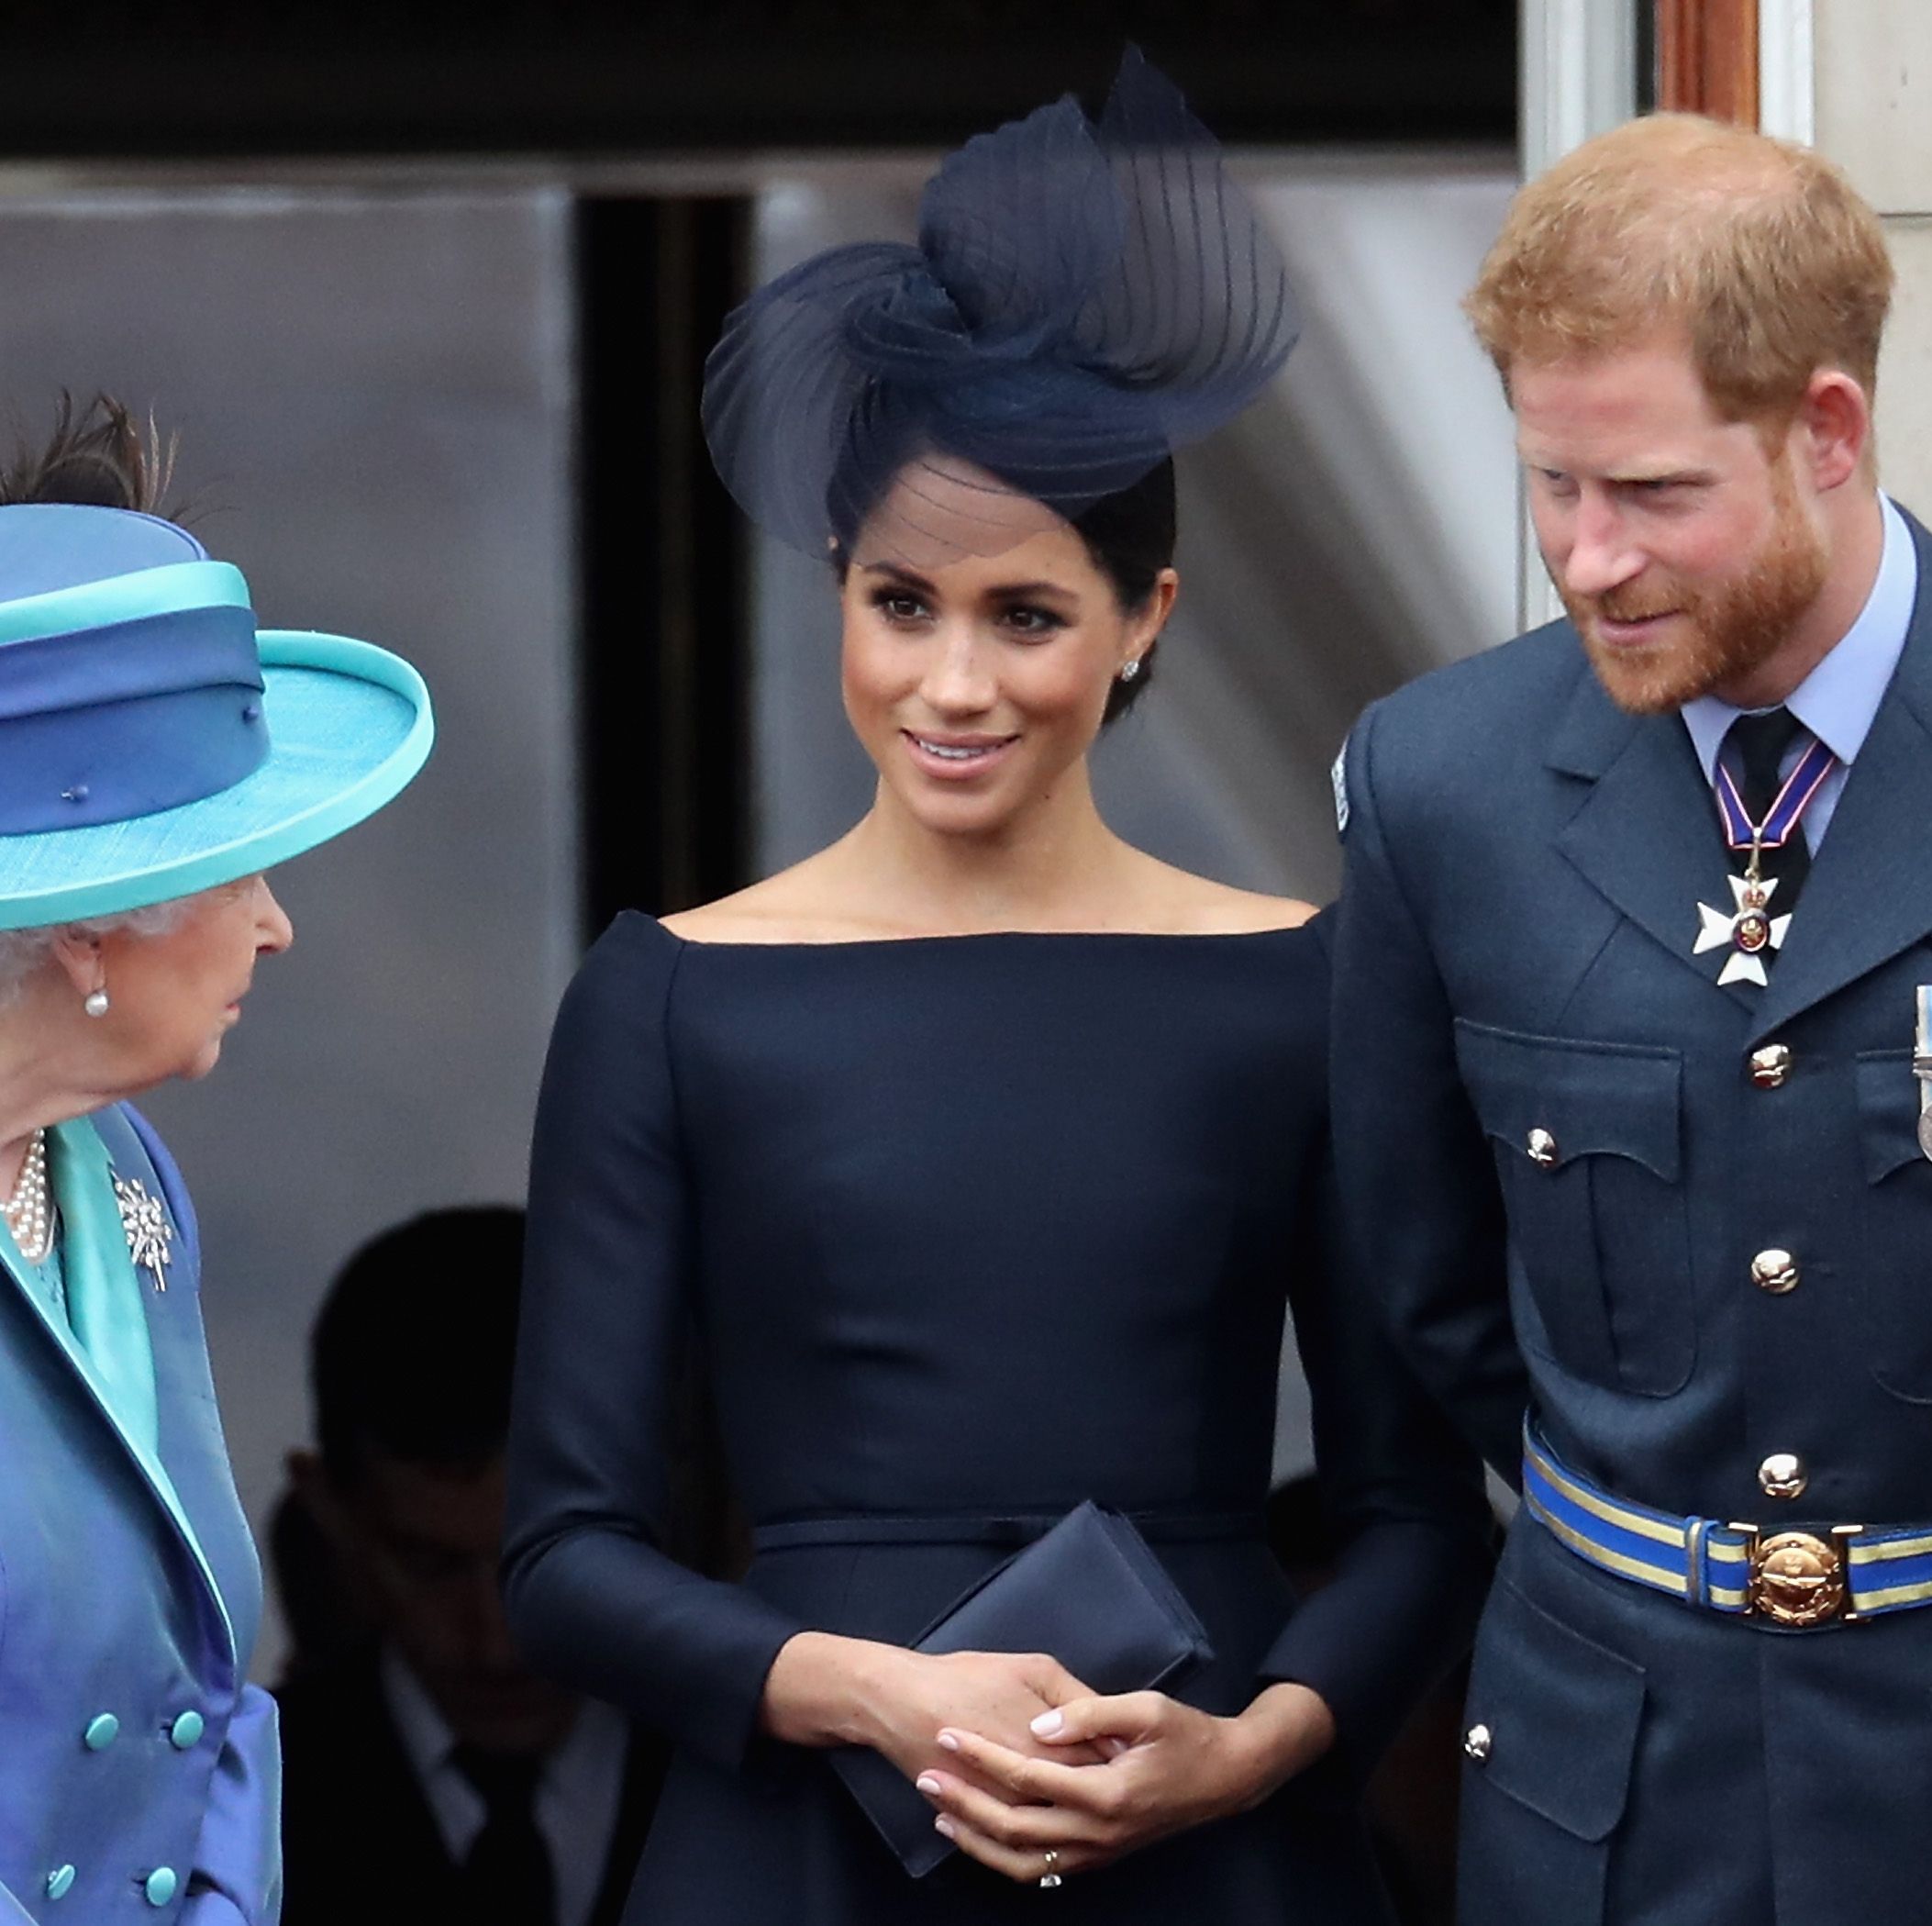 Prince Harry and Meghan Markle Told the Queen They'll 